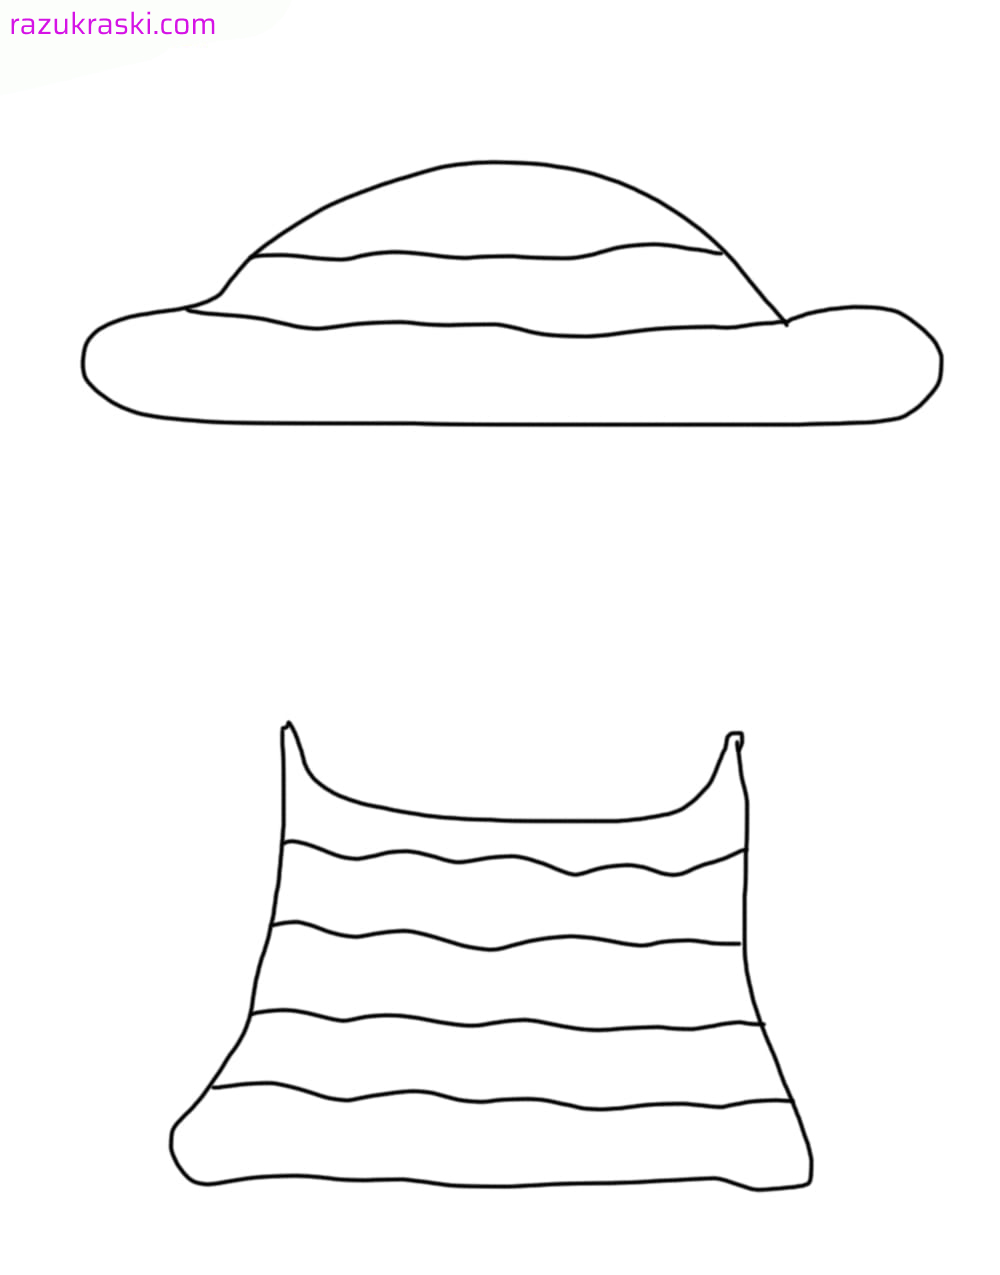 Coloring page Clothing for Lalafanfan Paper panama hat and dress